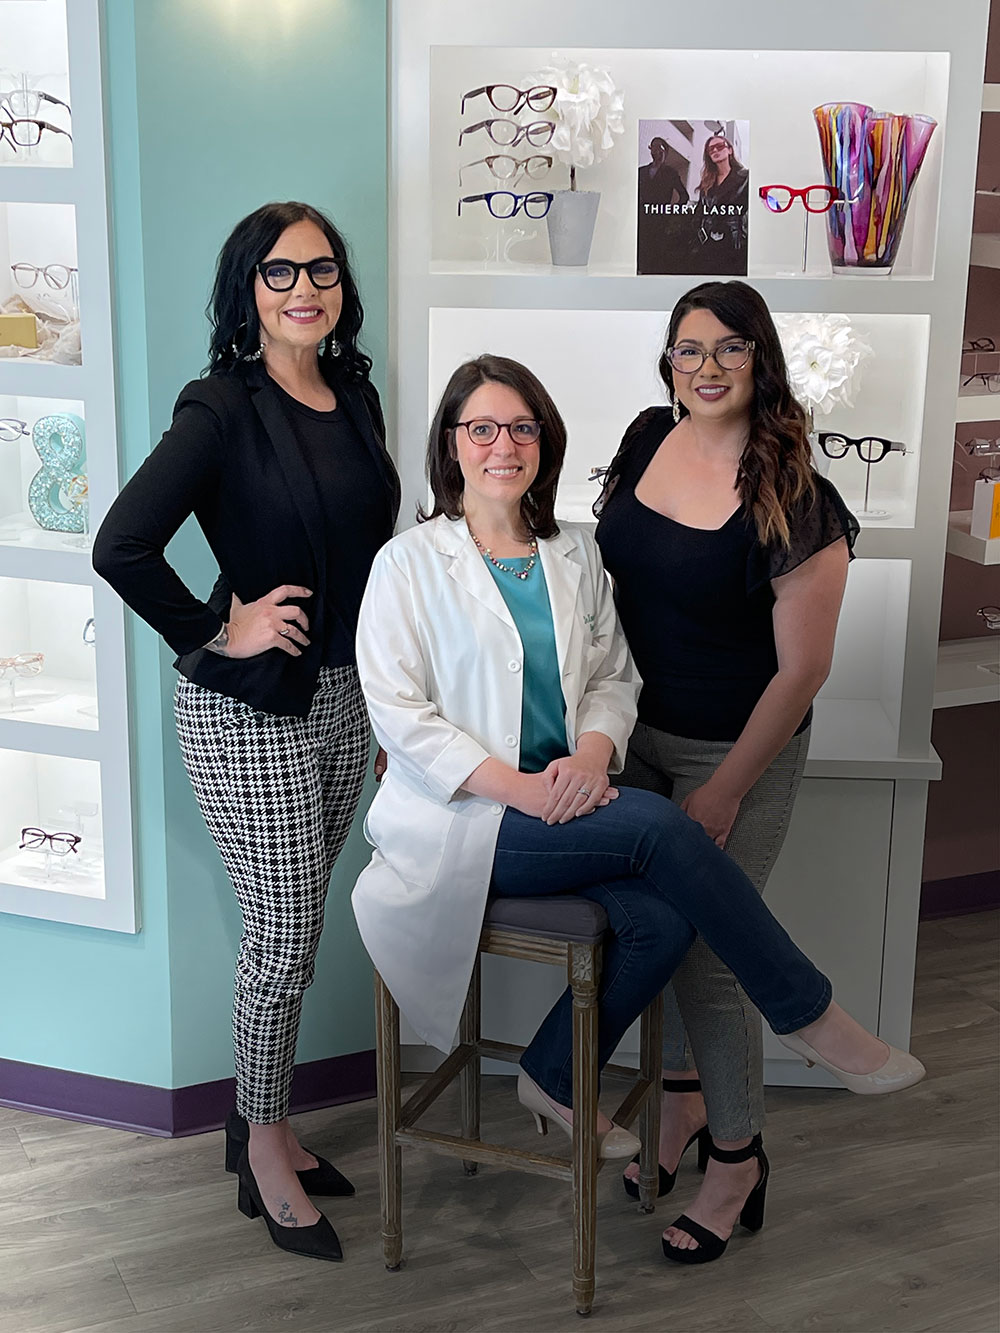 Tradewinds Eye Care Optical owner Dr. Kendra Hatfield, center, with Optical Associate Angie Stinson, left, and Office Manager Sarah Sticco, right.